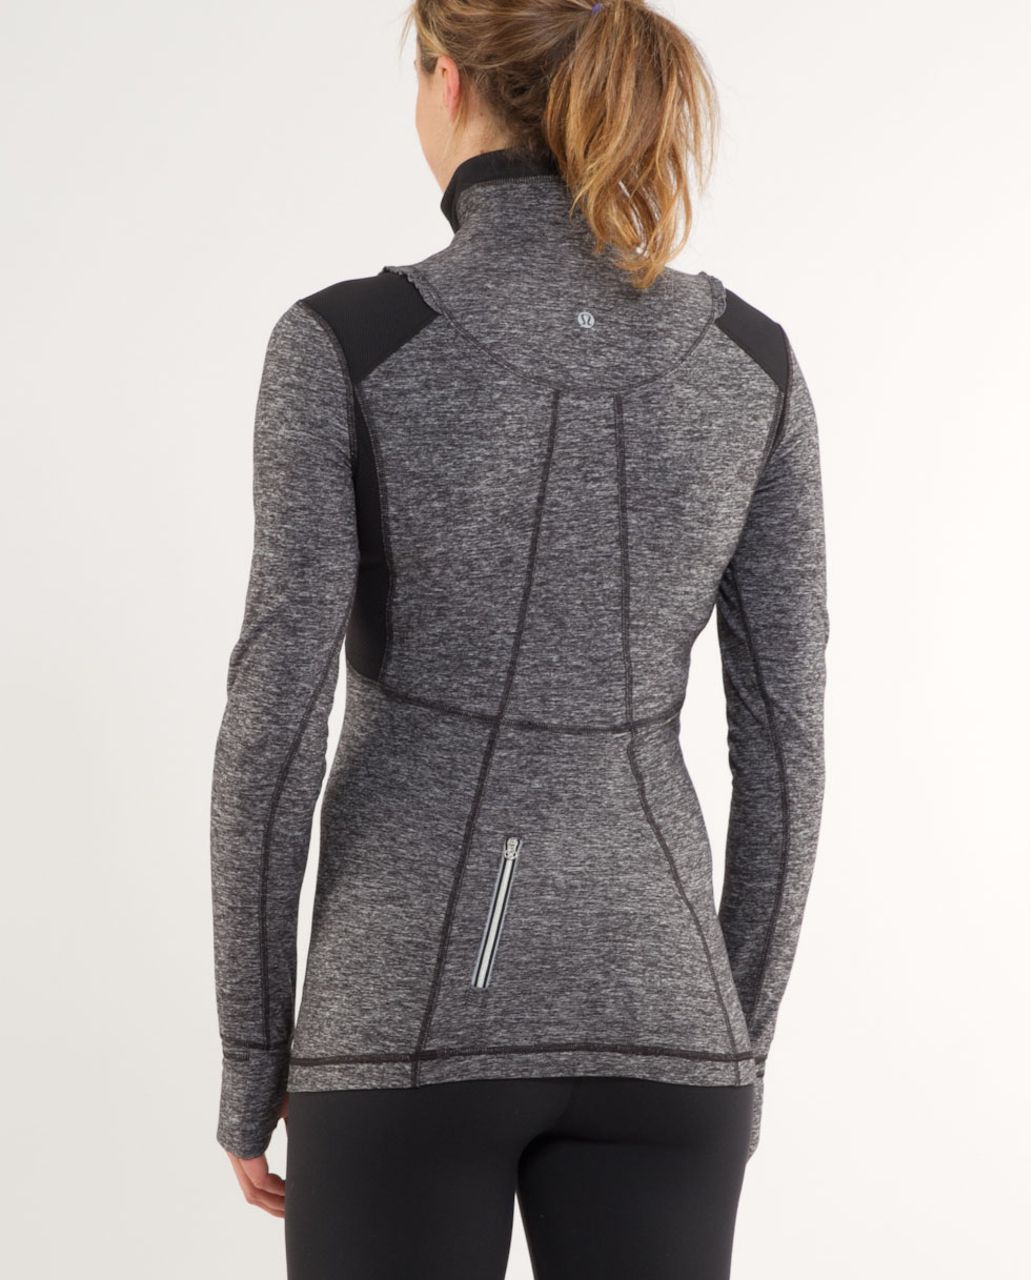 Lululemon Run:  Your Heart Out Pullover - Heathered Black